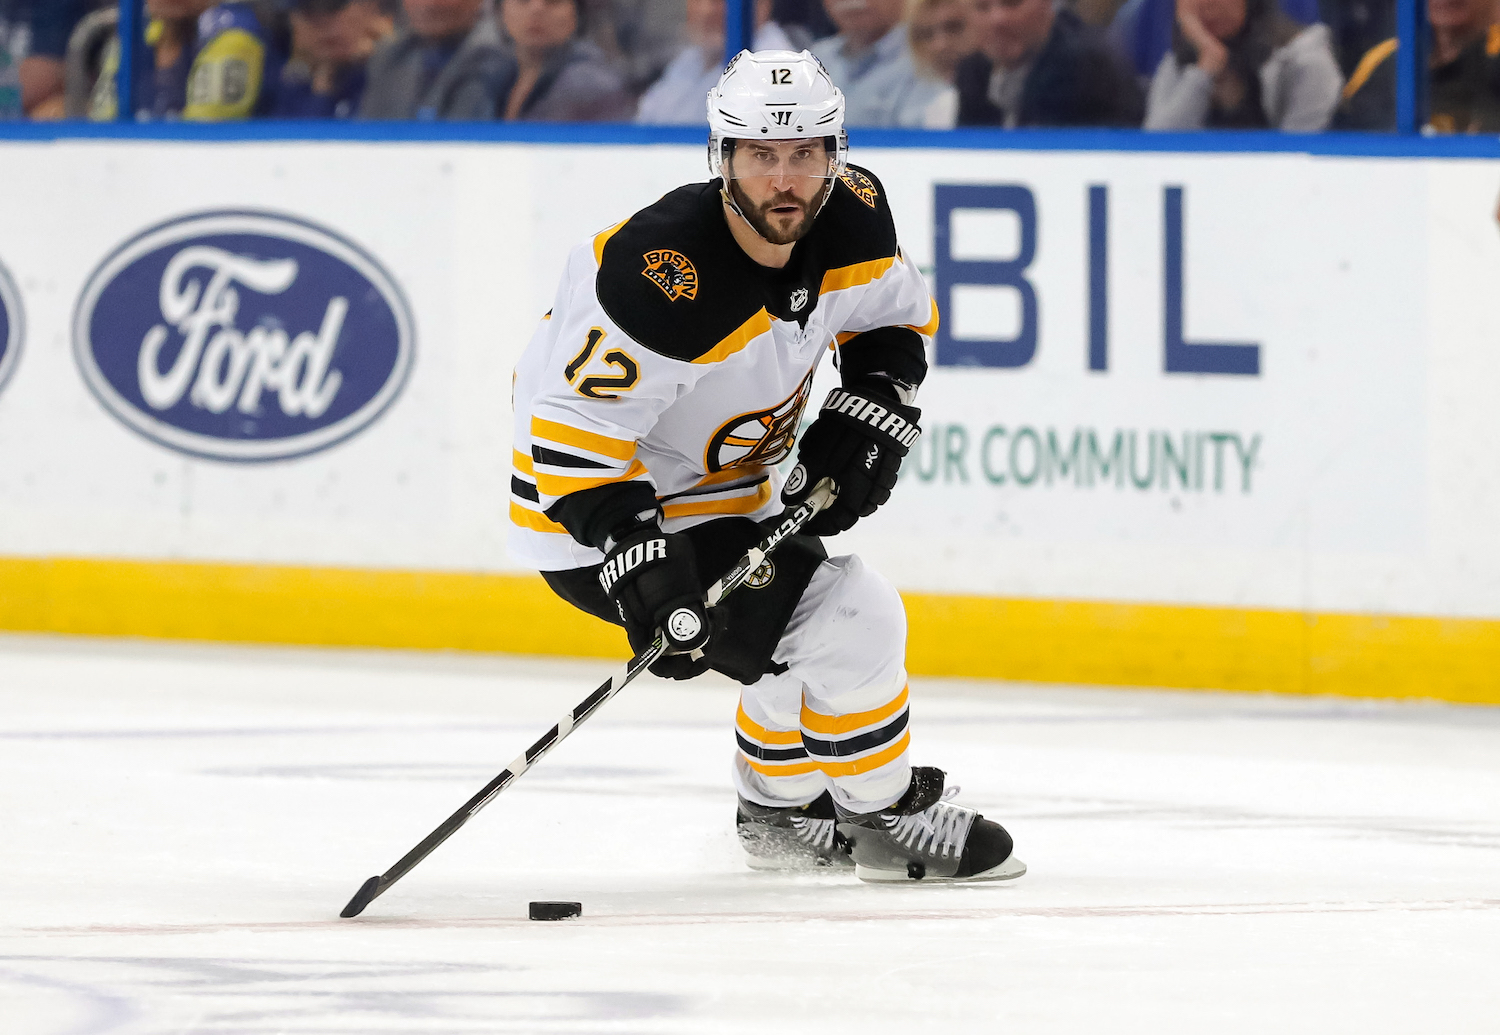 TAMPA, FL - APRIL 3: Brian Gionta #12 of the Boston Bruins brings the puck up against the Tampa Bay Lightning during the third period of the game at the Amalie Arena on April 3, 2018 in Tampa, Florida. (Photo by Mike Carlson/Getty Images) *** Local Caption *** Brian Gionta